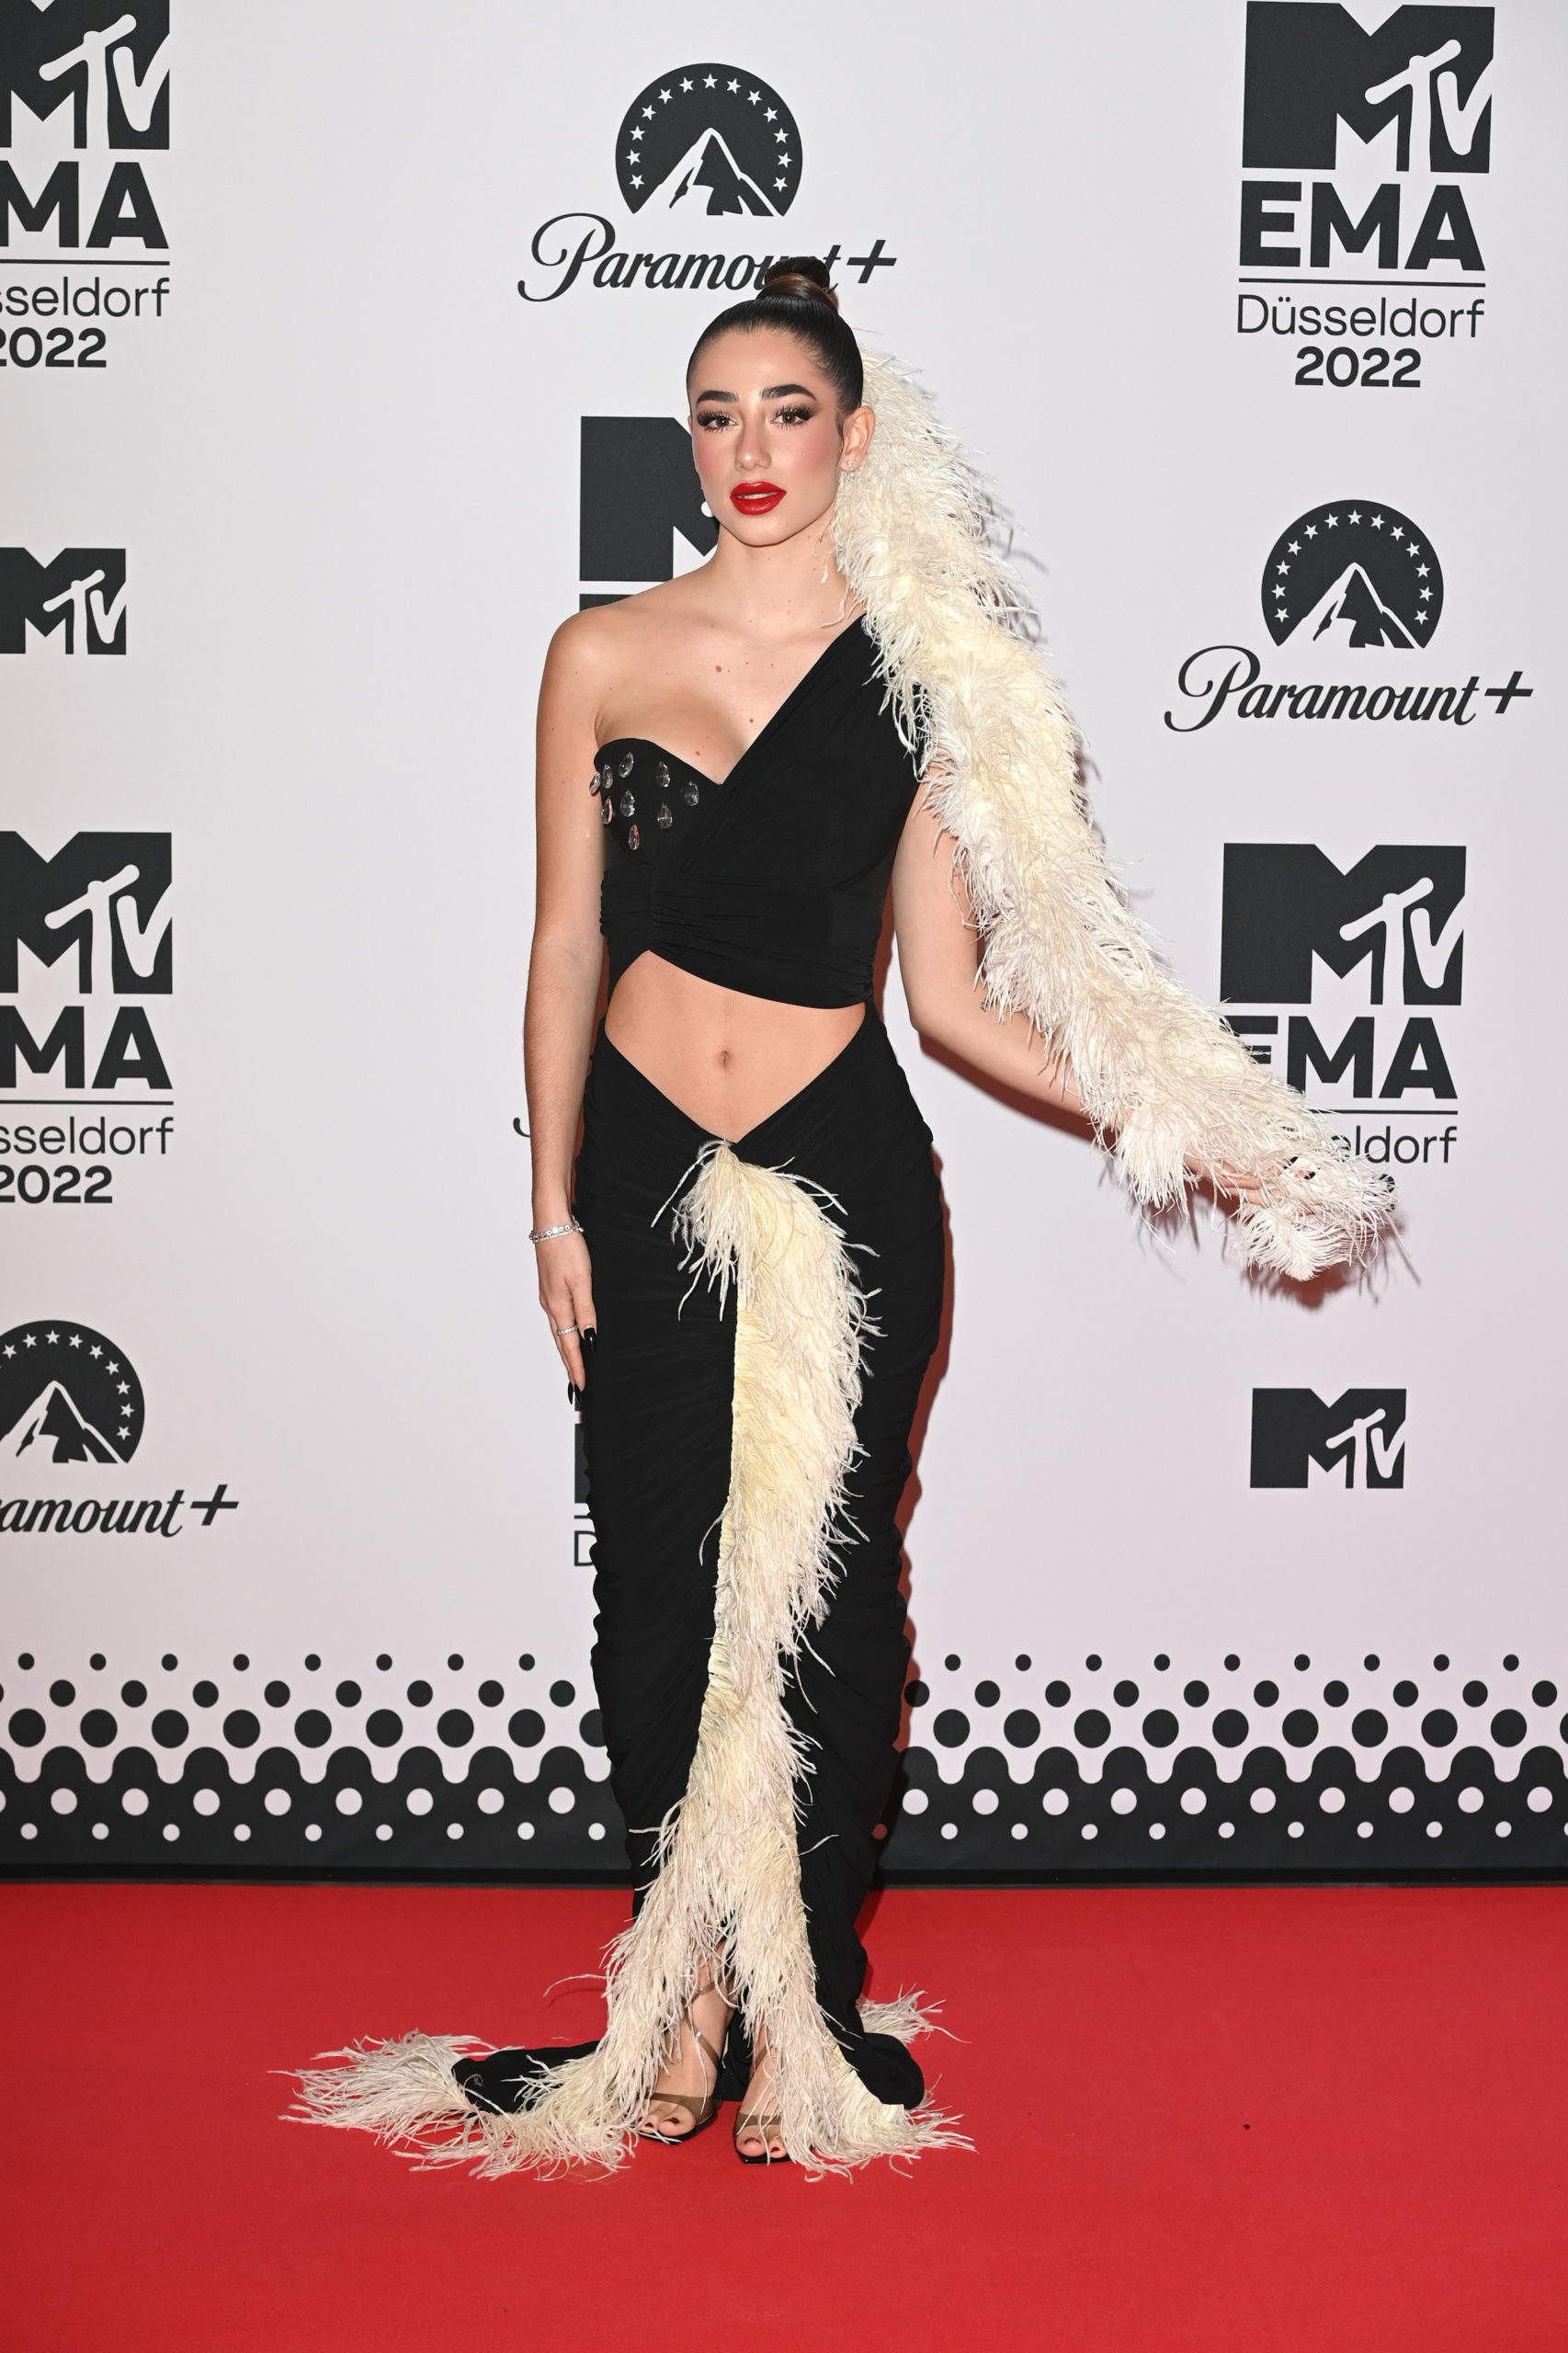  DUESSELDORF, GERMANY - NOVEMBER 13: Lola Lolita attends the red carpet during the MTV Europe Music Awards 2022 held at PSD Bank Dome on November 13, 2022 in Duesseldorf, Germany. (Photo by Kate Green/Getty Images for MTV)